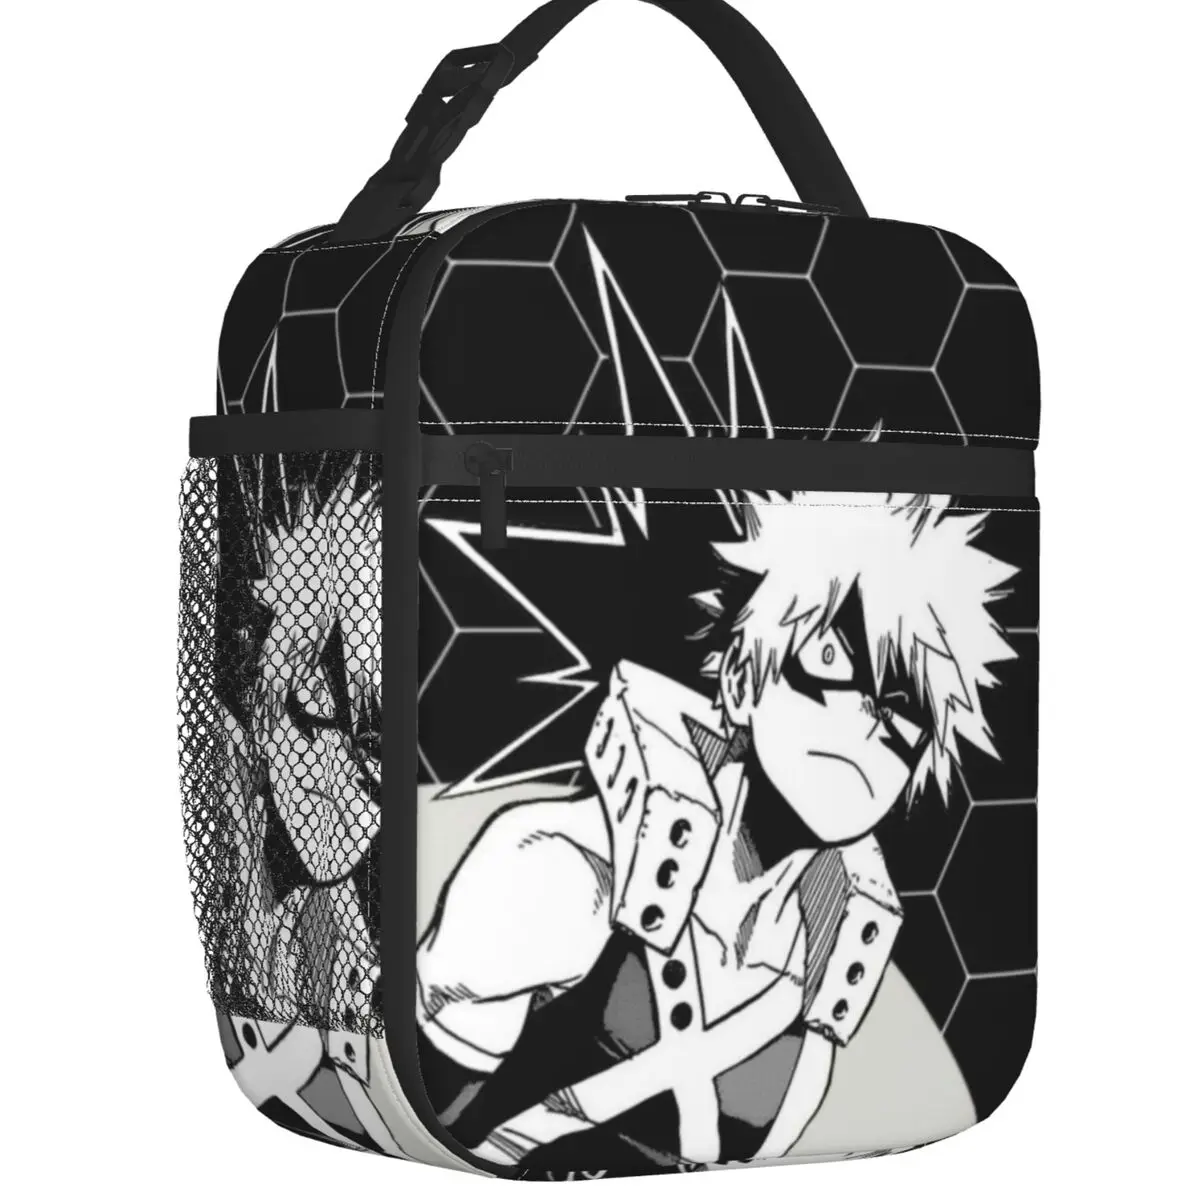 My Hero Academia Thermal Insulated Lunch Bags Katsuki Bakugo Anime Resuable Lunch Container for School Multifunction Food Box